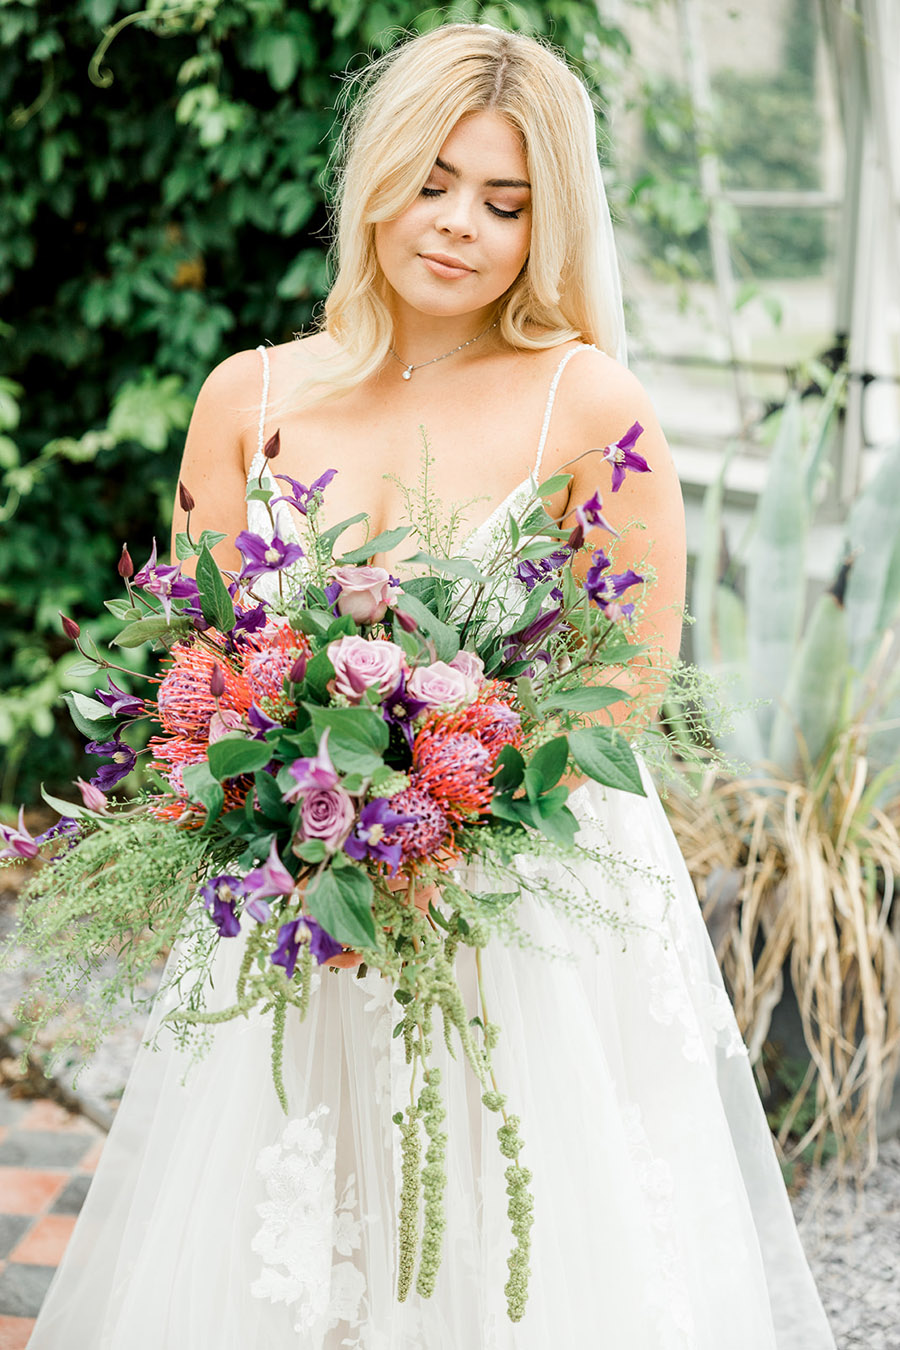 Modern intimate wedding styling inspiration from Slindon House, image credit Kelsie Scully (2)